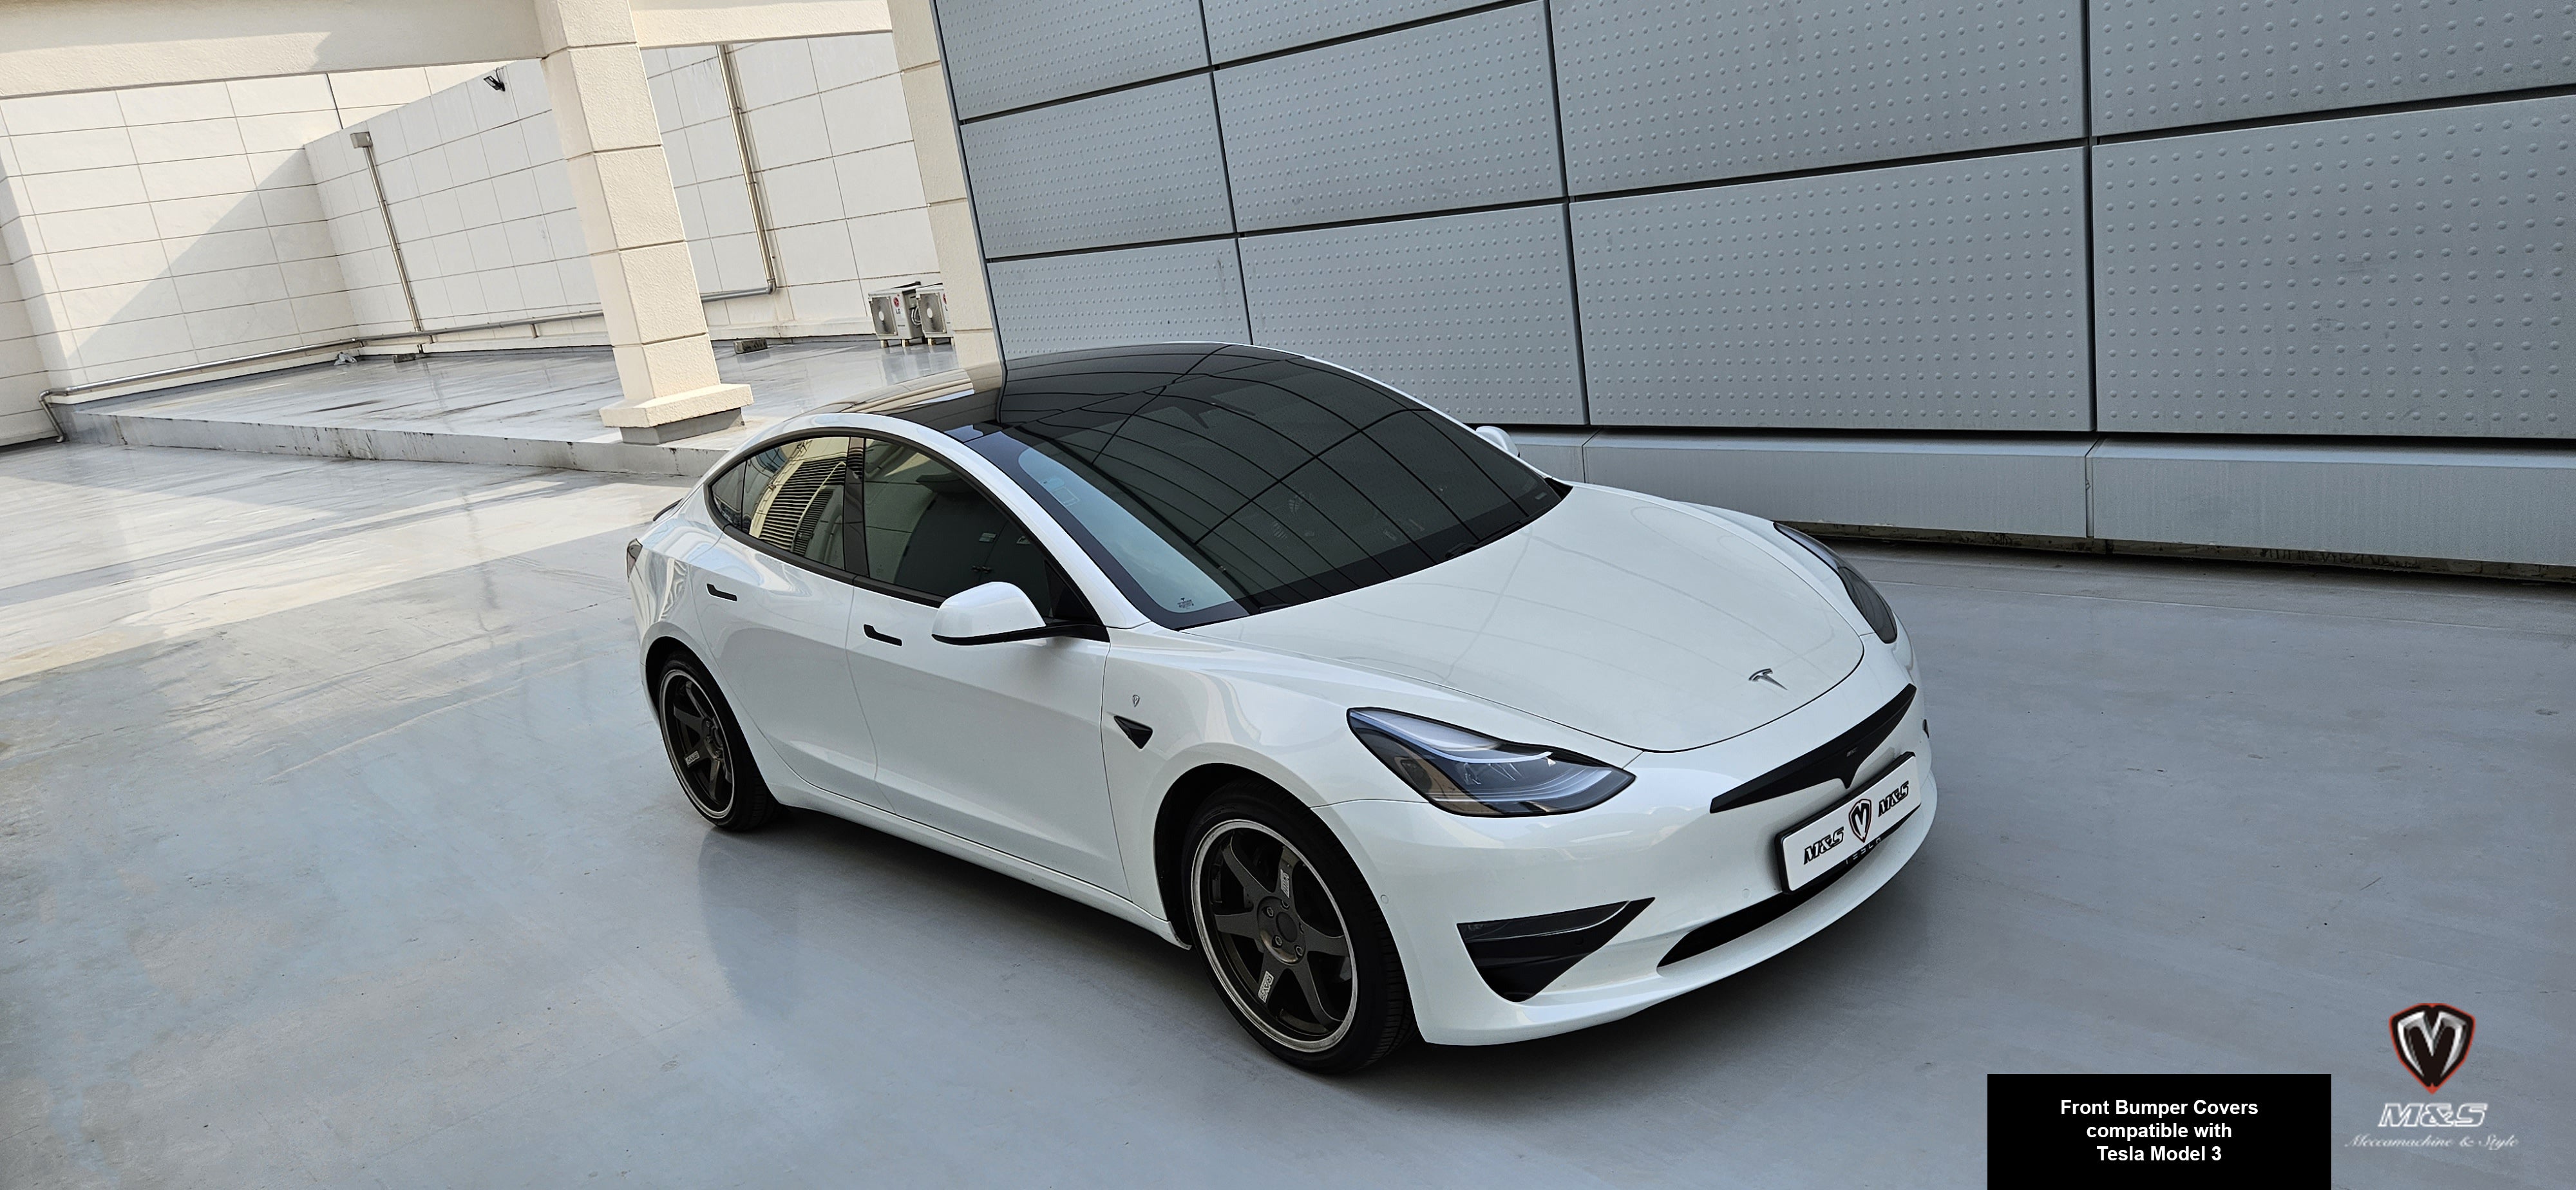 M&S Front Bumper Covers for Tesla Model 3